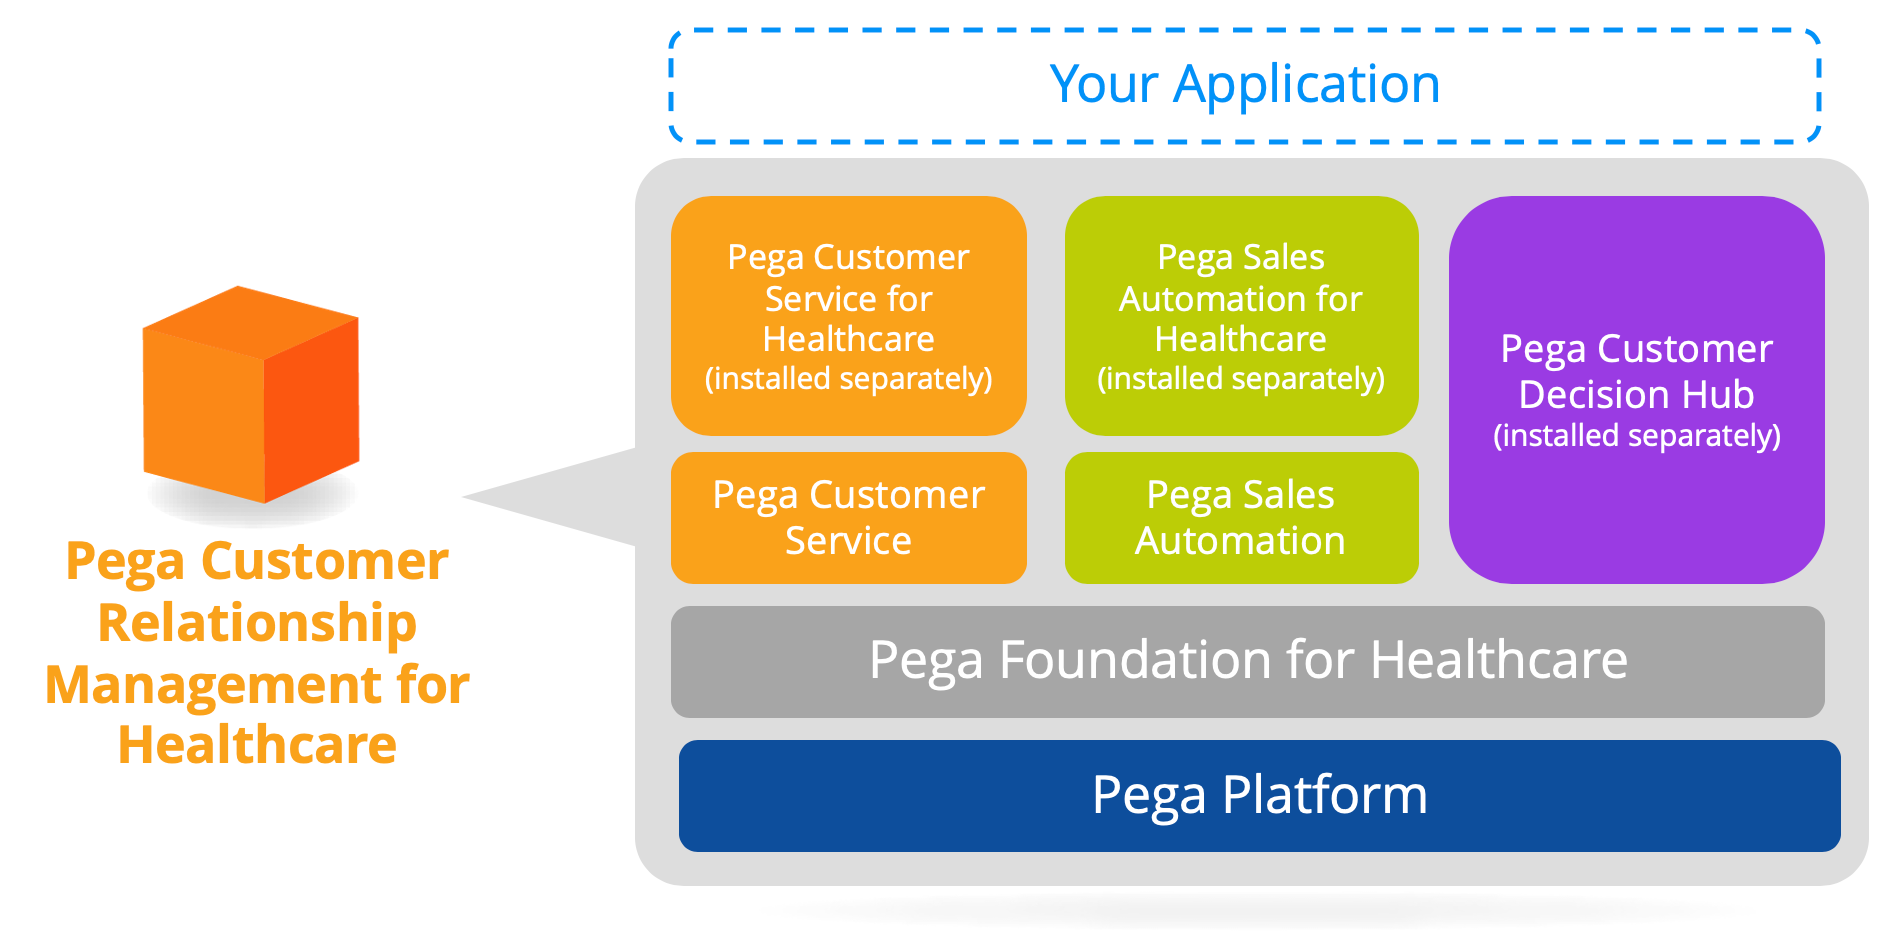 Pega Sales Automation for Healthcare application stack